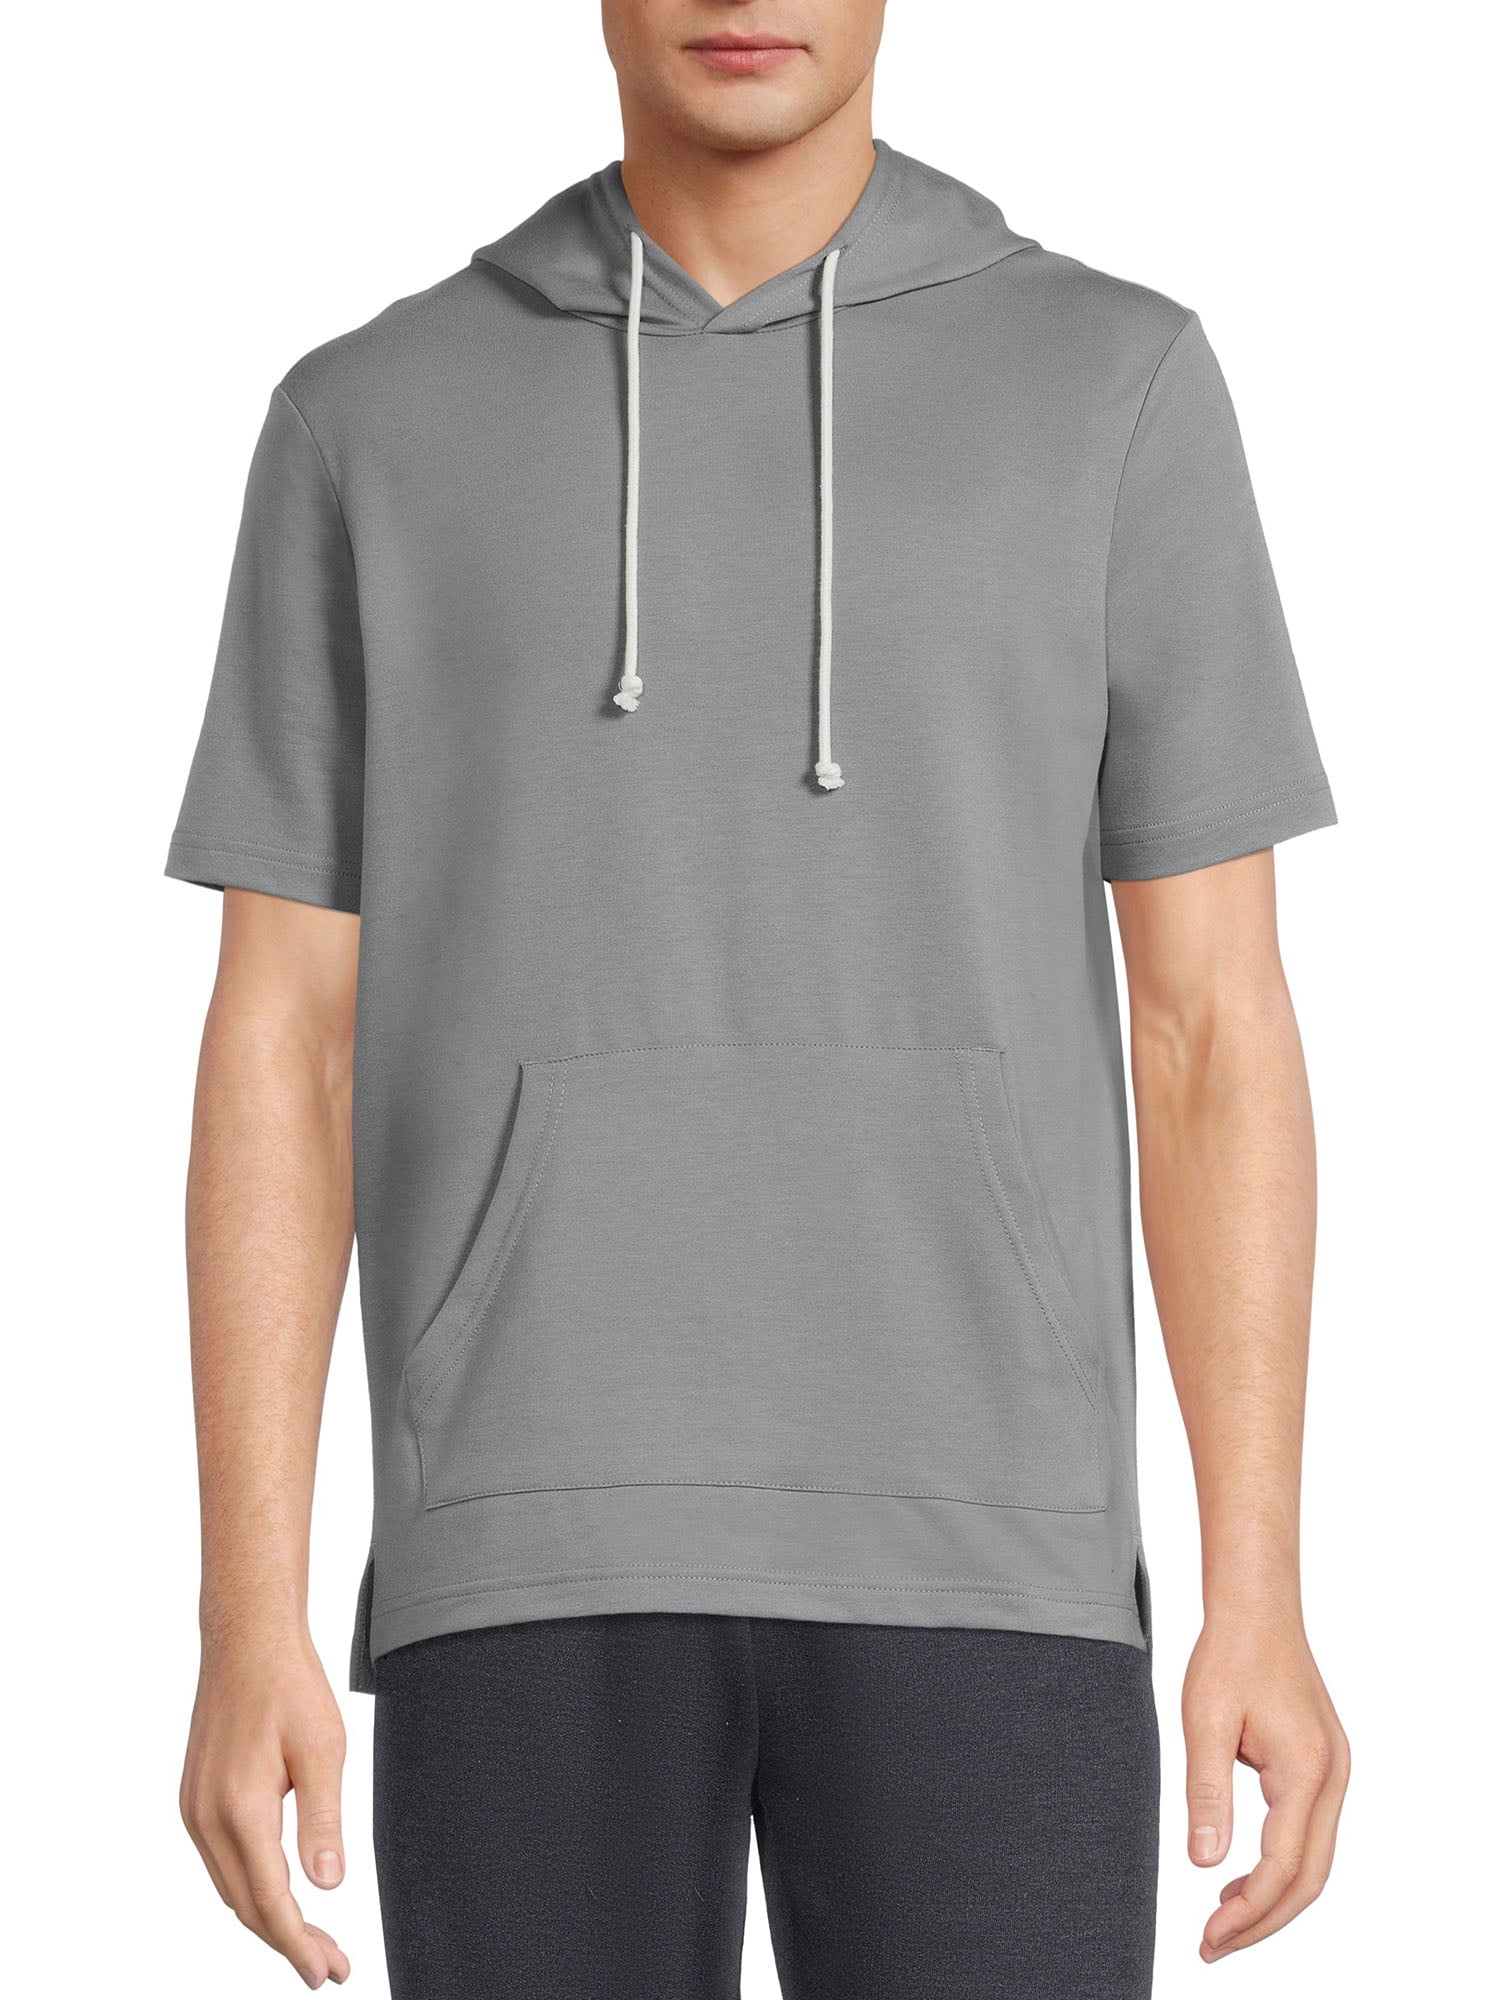 Athletic Works Men's French Terry Short Sleeve Hoodie 